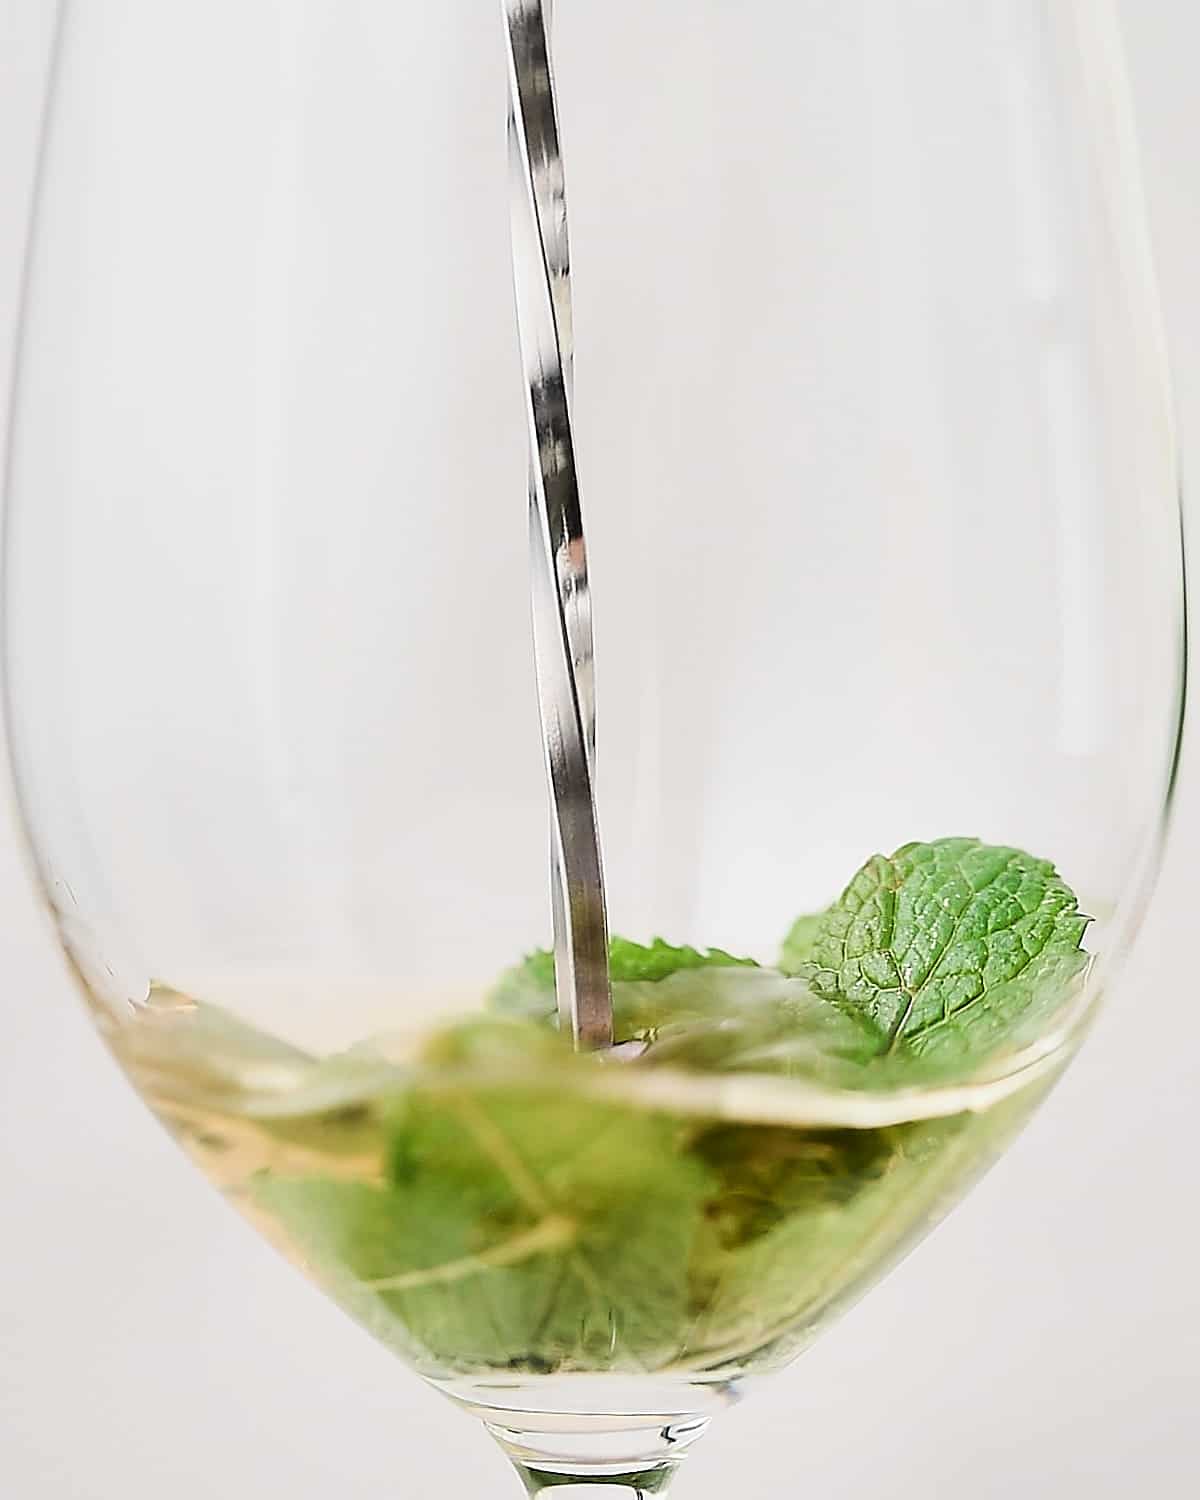 Muddling mint leaves with elderflower liqueur in a white wine glass.